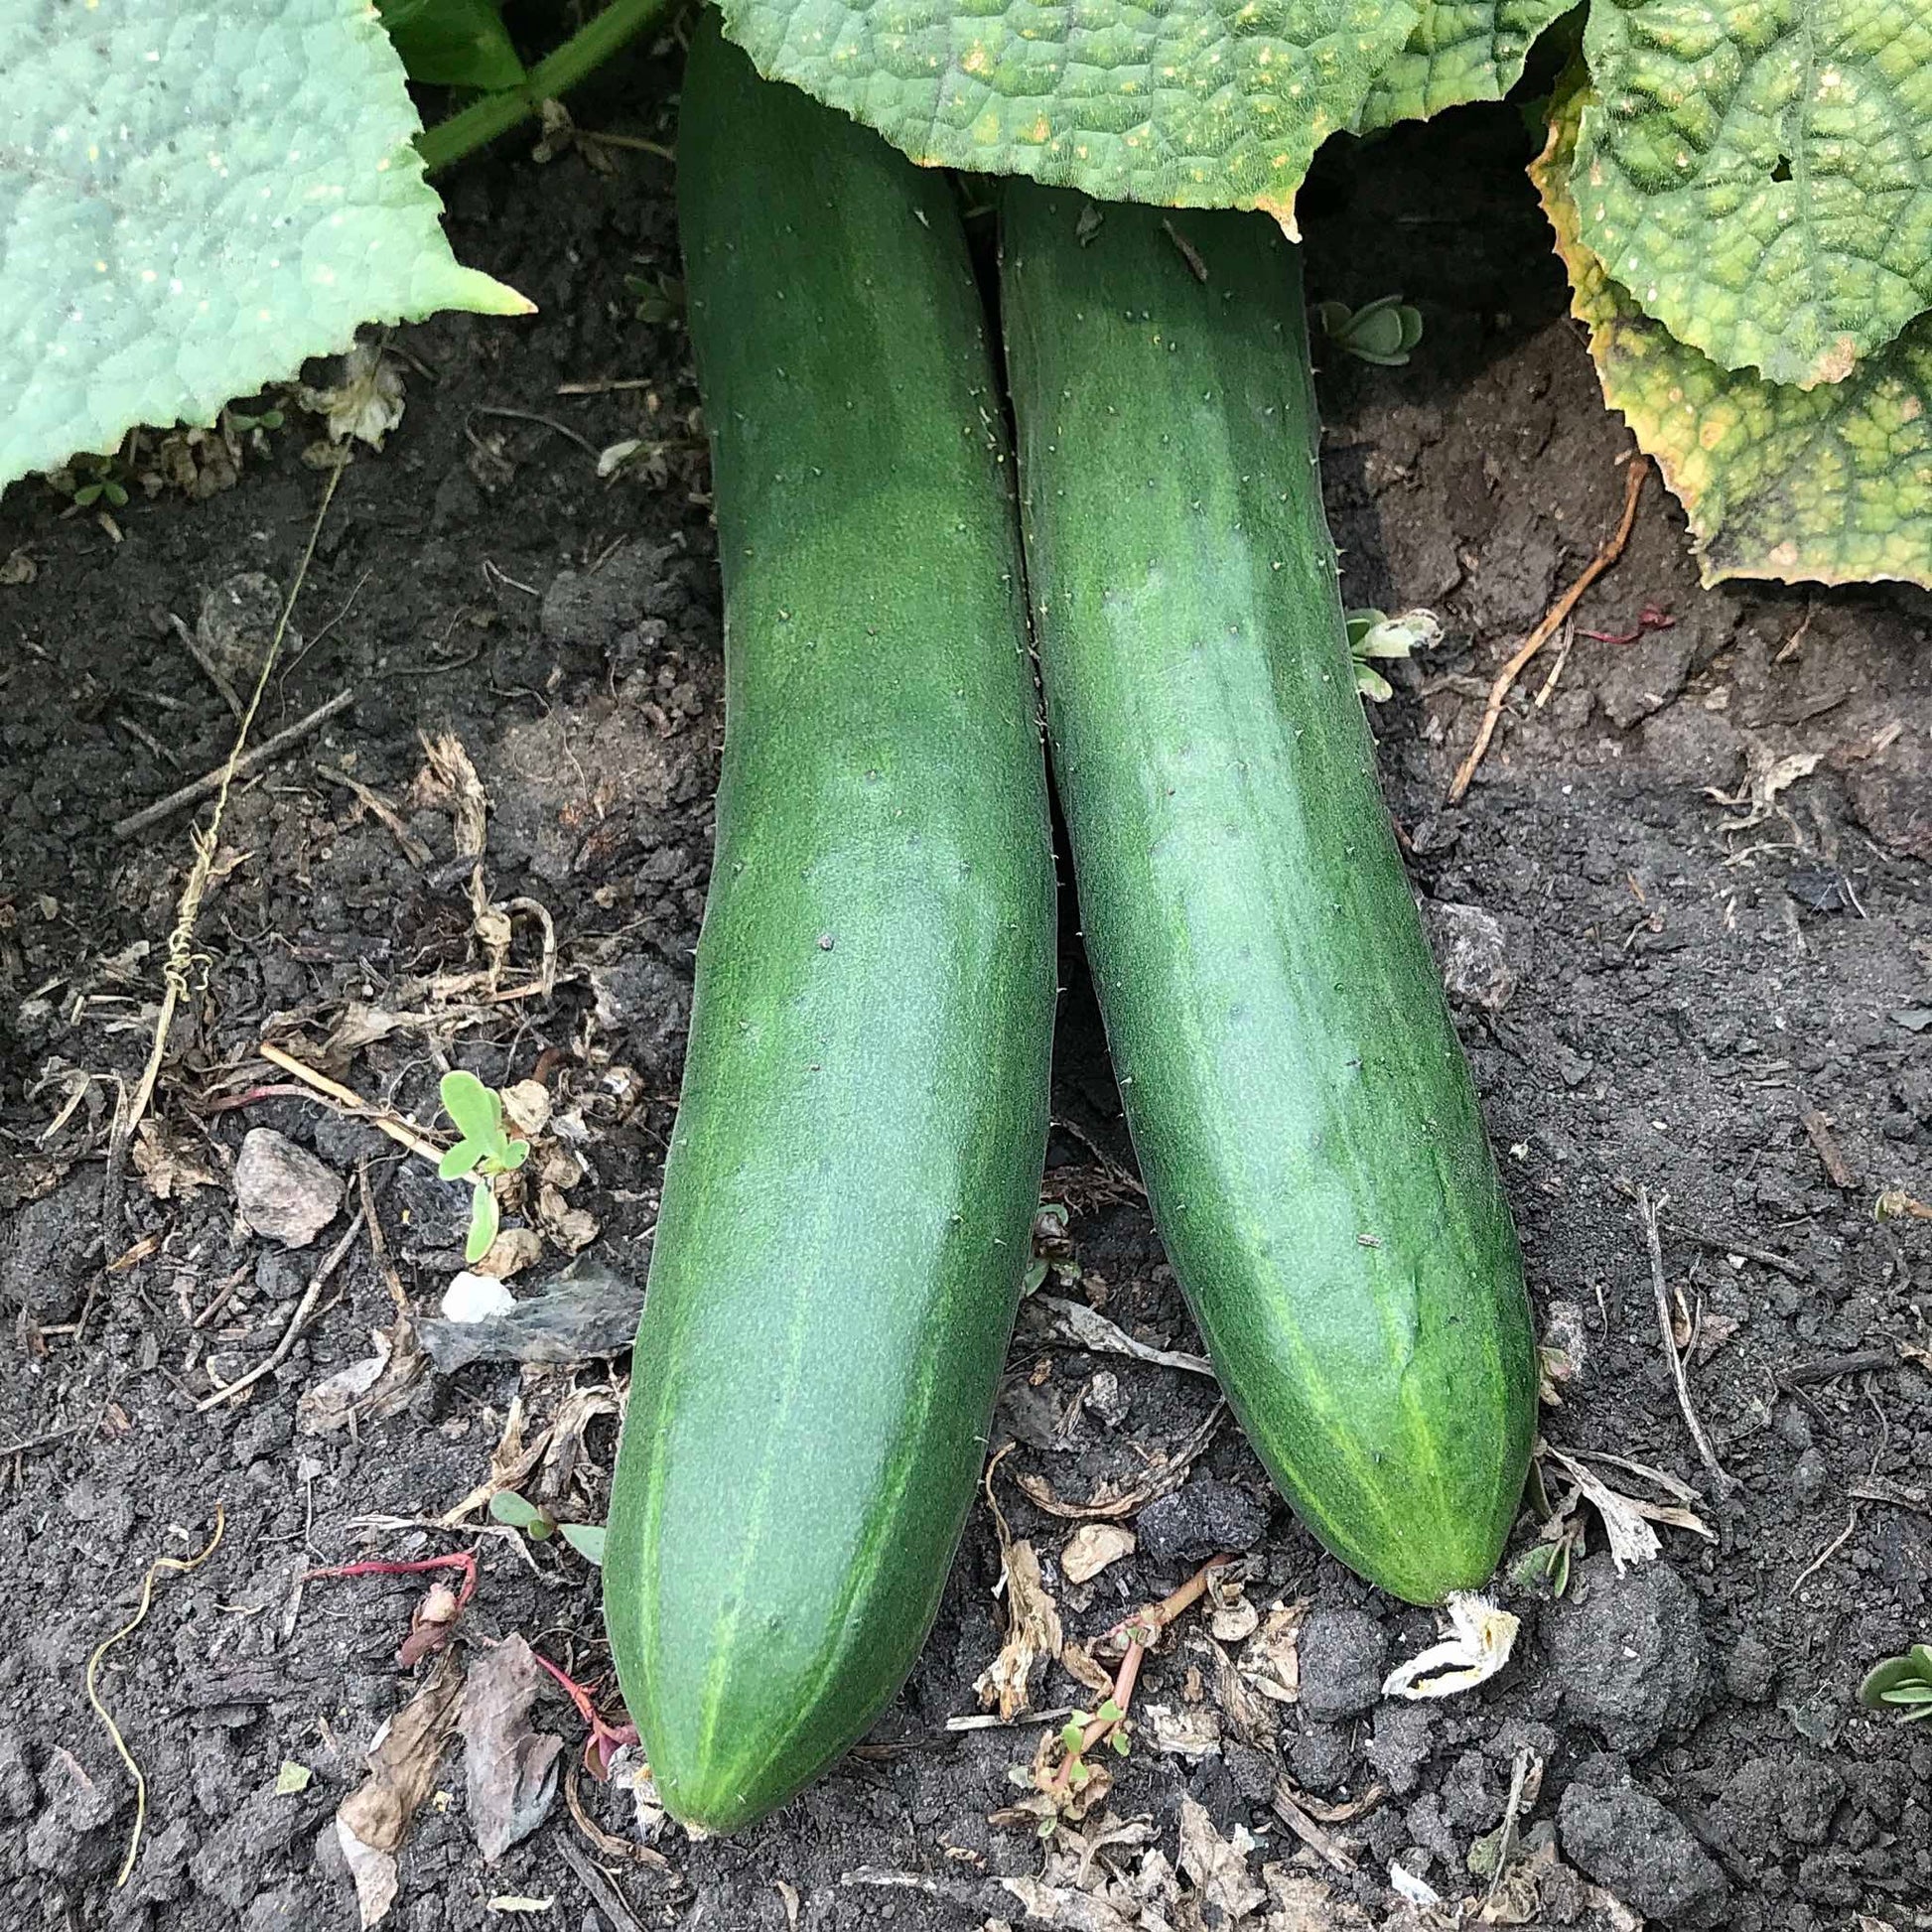 Two slicer cucumbers ready for harvest.